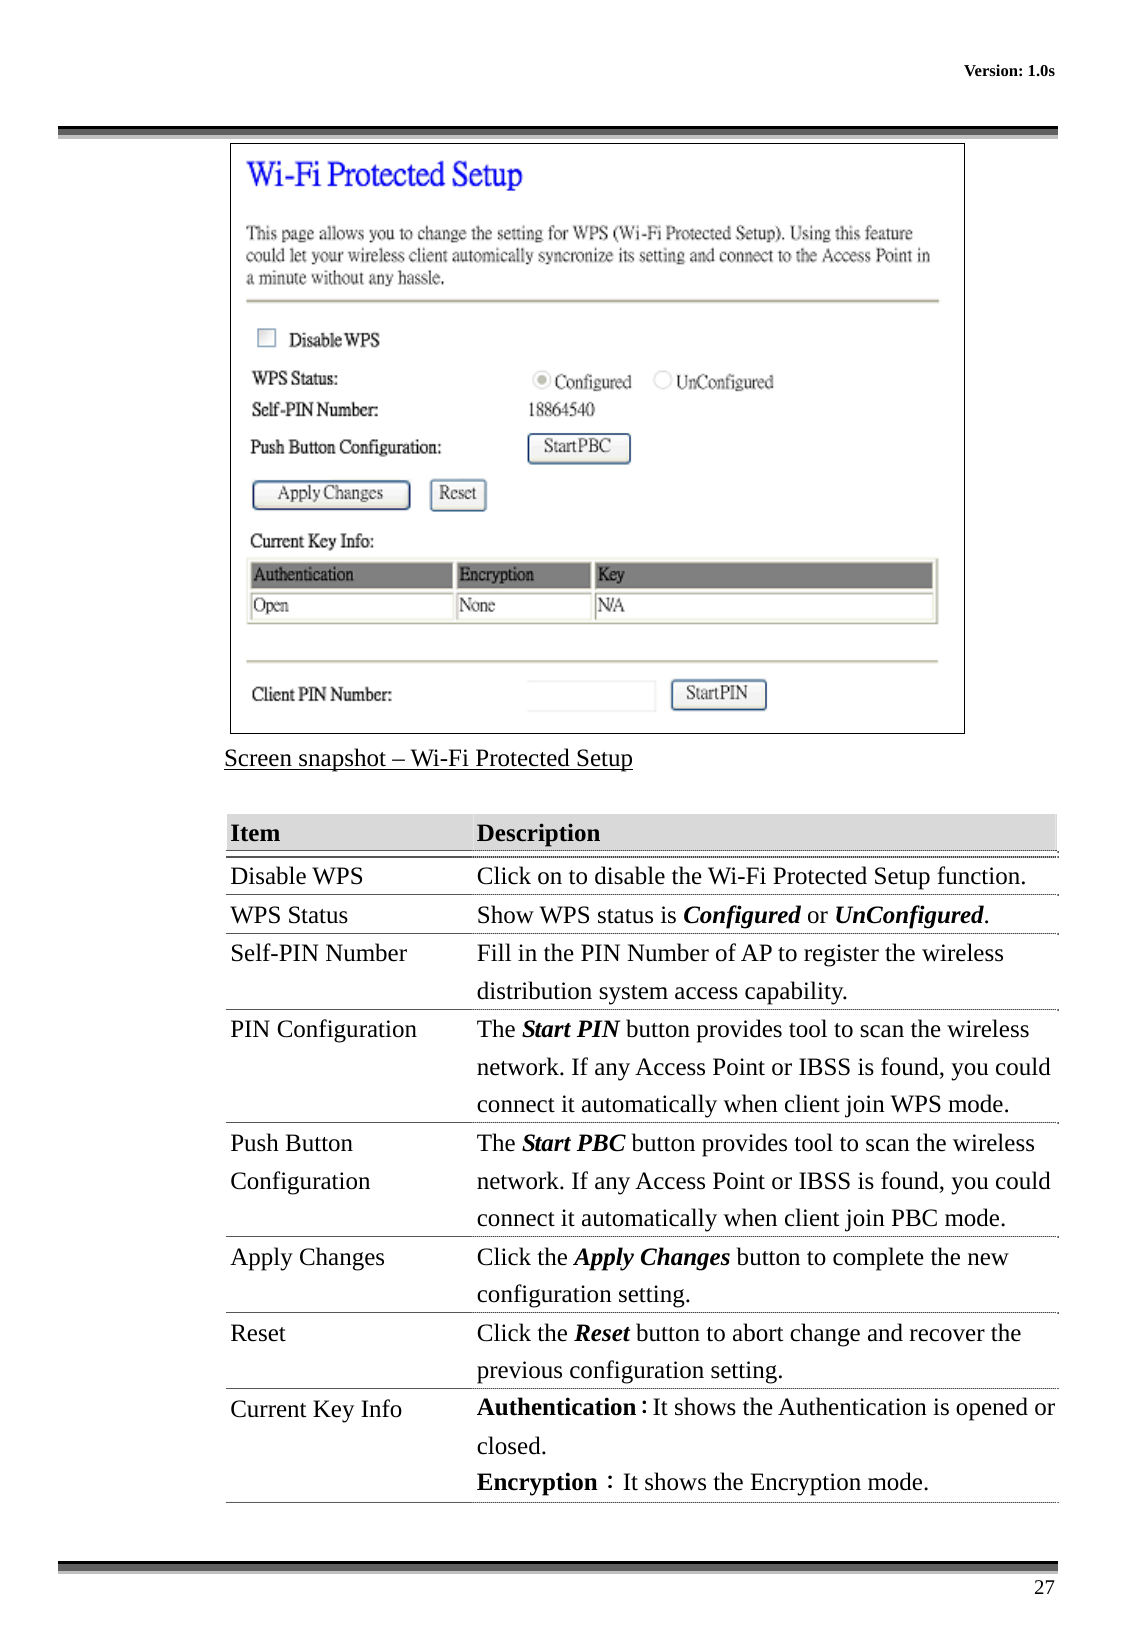    Version: 1.0s      27  Screen snapshot – Wi-Fi Protected Setup  Item  Description   Disable WPS  Click on to disable the Wi-Fi Protected Setup function. WPS Status  Show WPS status is Configured or UnConfigured. Self-PIN Number  Fill in the PIN Number of AP to register the wireless distribution system access capability. PIN Configuration  The Start PIN button provides tool to scan the wireless network. If any Access Point or IBSS is found, you could connect it automatically when client join WPS mode. Push Button Configuration The Start PBC button provides tool to scan the wireless network. If any Access Point or IBSS is found, you could connect it automatically when client join PBC mode. Apply Changes  Click the Apply Changes button to complete the new configuration setting. Reset Click the Reset button to abort change and recover the previous configuration setting. Current Key Info Authentication：It shows the Authentication is opened or closed. Encryption：It shows the Encryption mode. 